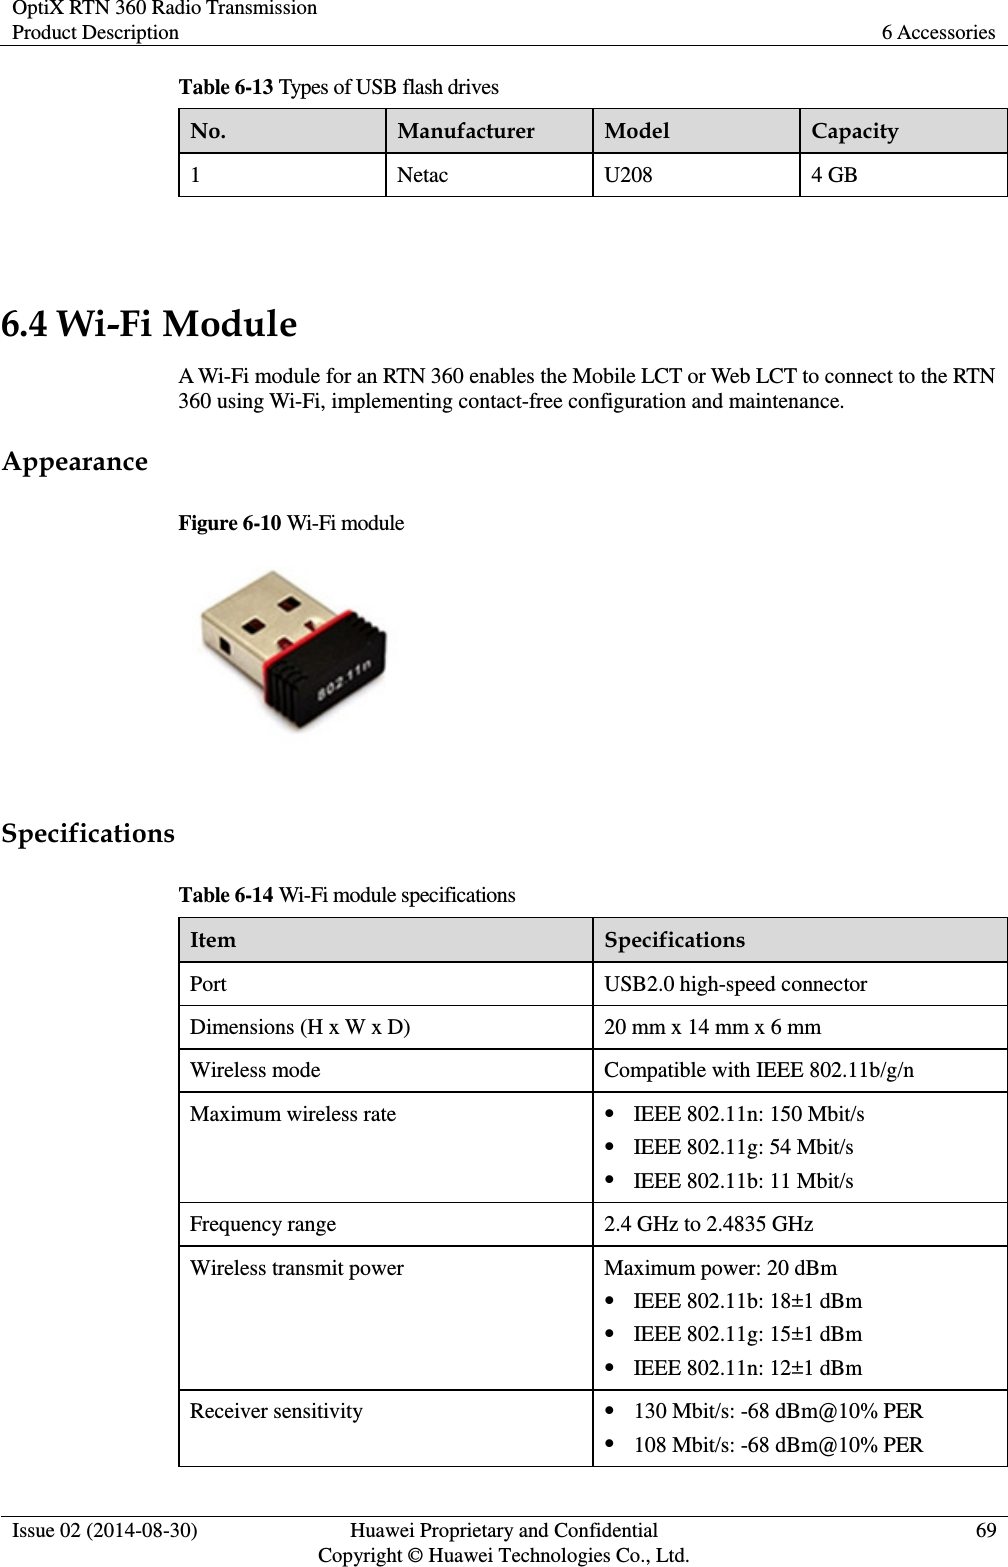 OptiX RTN 360 Radio Transmission Product Description 6 Accessories  Issue 02 (2014-08-30) Huawei Proprietary and Confidential                                     Copyright © Huawei Technologies Co., Ltd. 69  Table 6-13 Types of USB flash drives No. Manufacturer Model Capacity 1 Netac U208 4 GB  6.4 Wi-Fi Module A Wi-Fi module for an RTN 360 enables the Mobile LCT or Web LCT to connect to the RTN 360 using Wi-Fi, implementing contact-free configuration and maintenance. Appearance Figure 6-10 Wi-Fi module   Specifications Table 6-14 Wi-Fi module specifications Item Specifications Port USB2.0 high-speed connector Dimensions (H x W x D) 20 mm x 14 mm x 6 mm   Wireless mode Compatible with IEEE 802.11b/g/n Maximum wireless rate  IEEE 802.11n: 150 Mbit/s  IEEE 802.11g: 54 Mbit/s  IEEE 802.11b: 11 Mbit/s Frequency range 2.4 GHz to 2.4835 GHz Wireless transmit power Maximum power: 20 dBm  IEEE 802.11b: 18±1 dBm    IEEE 802.11g: 15±1 dBm    IEEE 802.11n: 12±1 dBm   Receiver sensitivity  130 Mbit/s: -68 dBm@10% PER  108 Mbit/s: -68 dBm@10% PER 